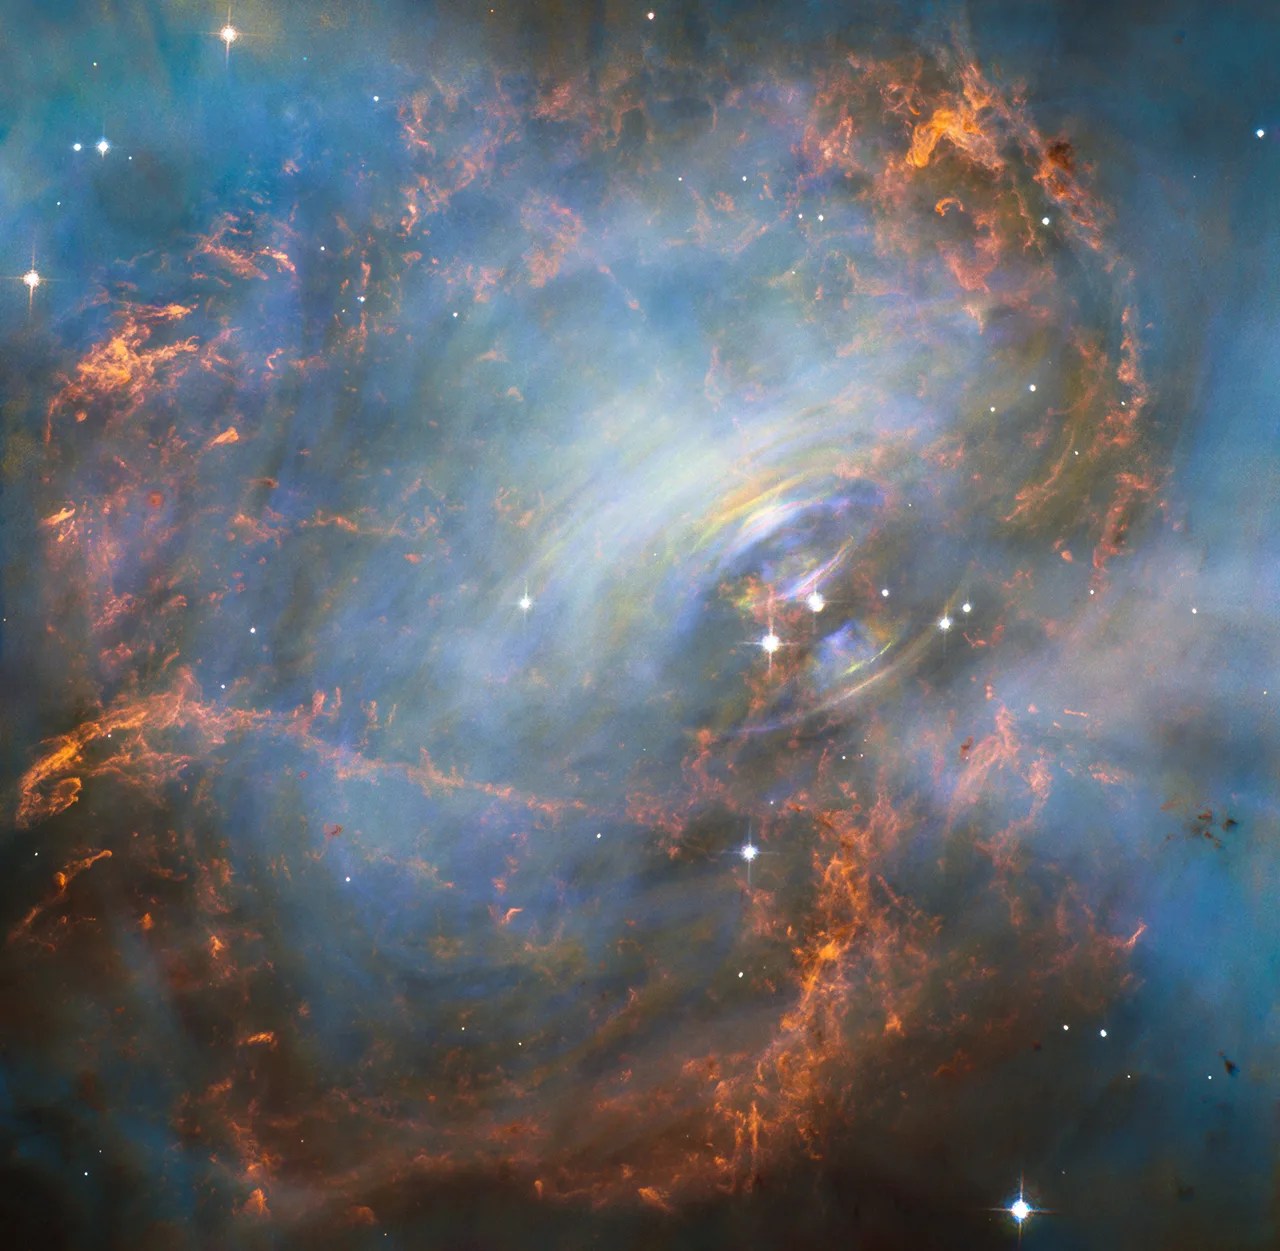 Moving heart of the Crab Nebula – M1